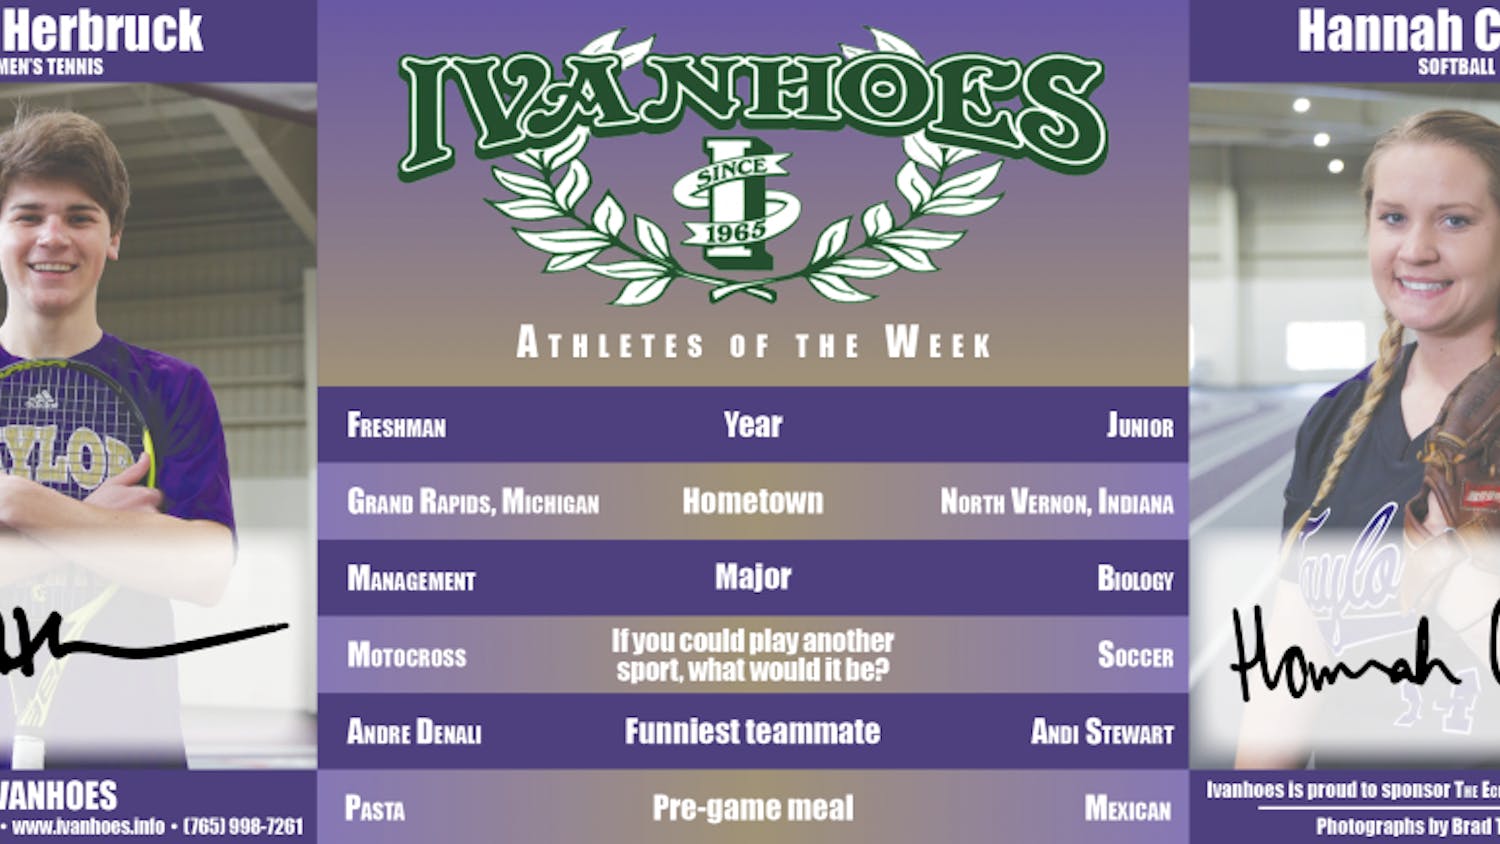 Athletes-of-the-Week-–-Jake-Herbruck-and-Hannah-Castor.png